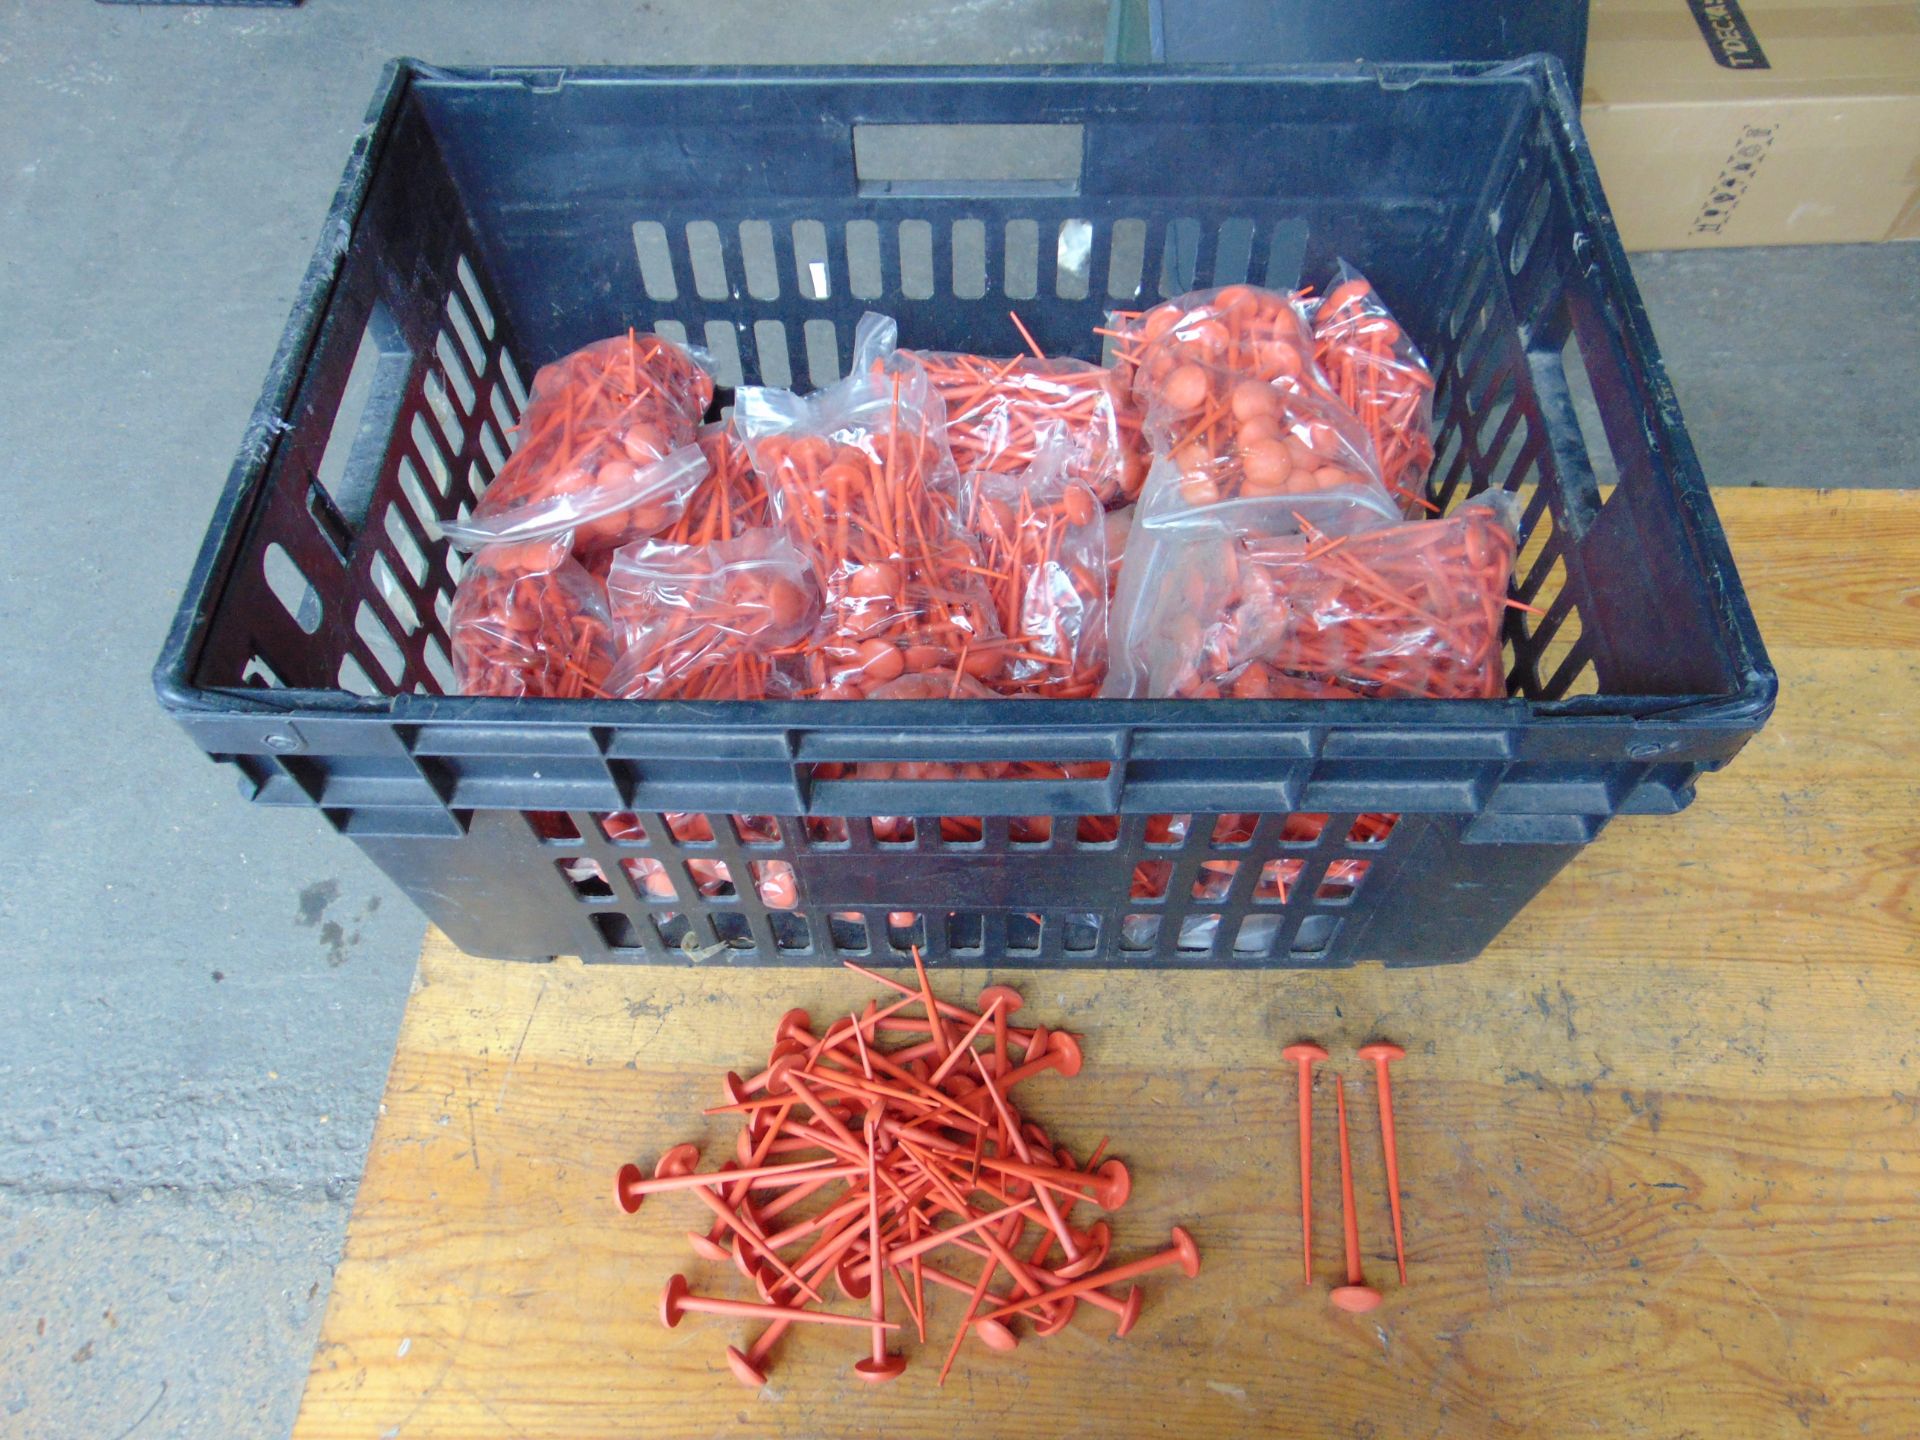 New Unissued Approx. 1000 Red Plastic Ground Marking Spikes - Image 4 of 4